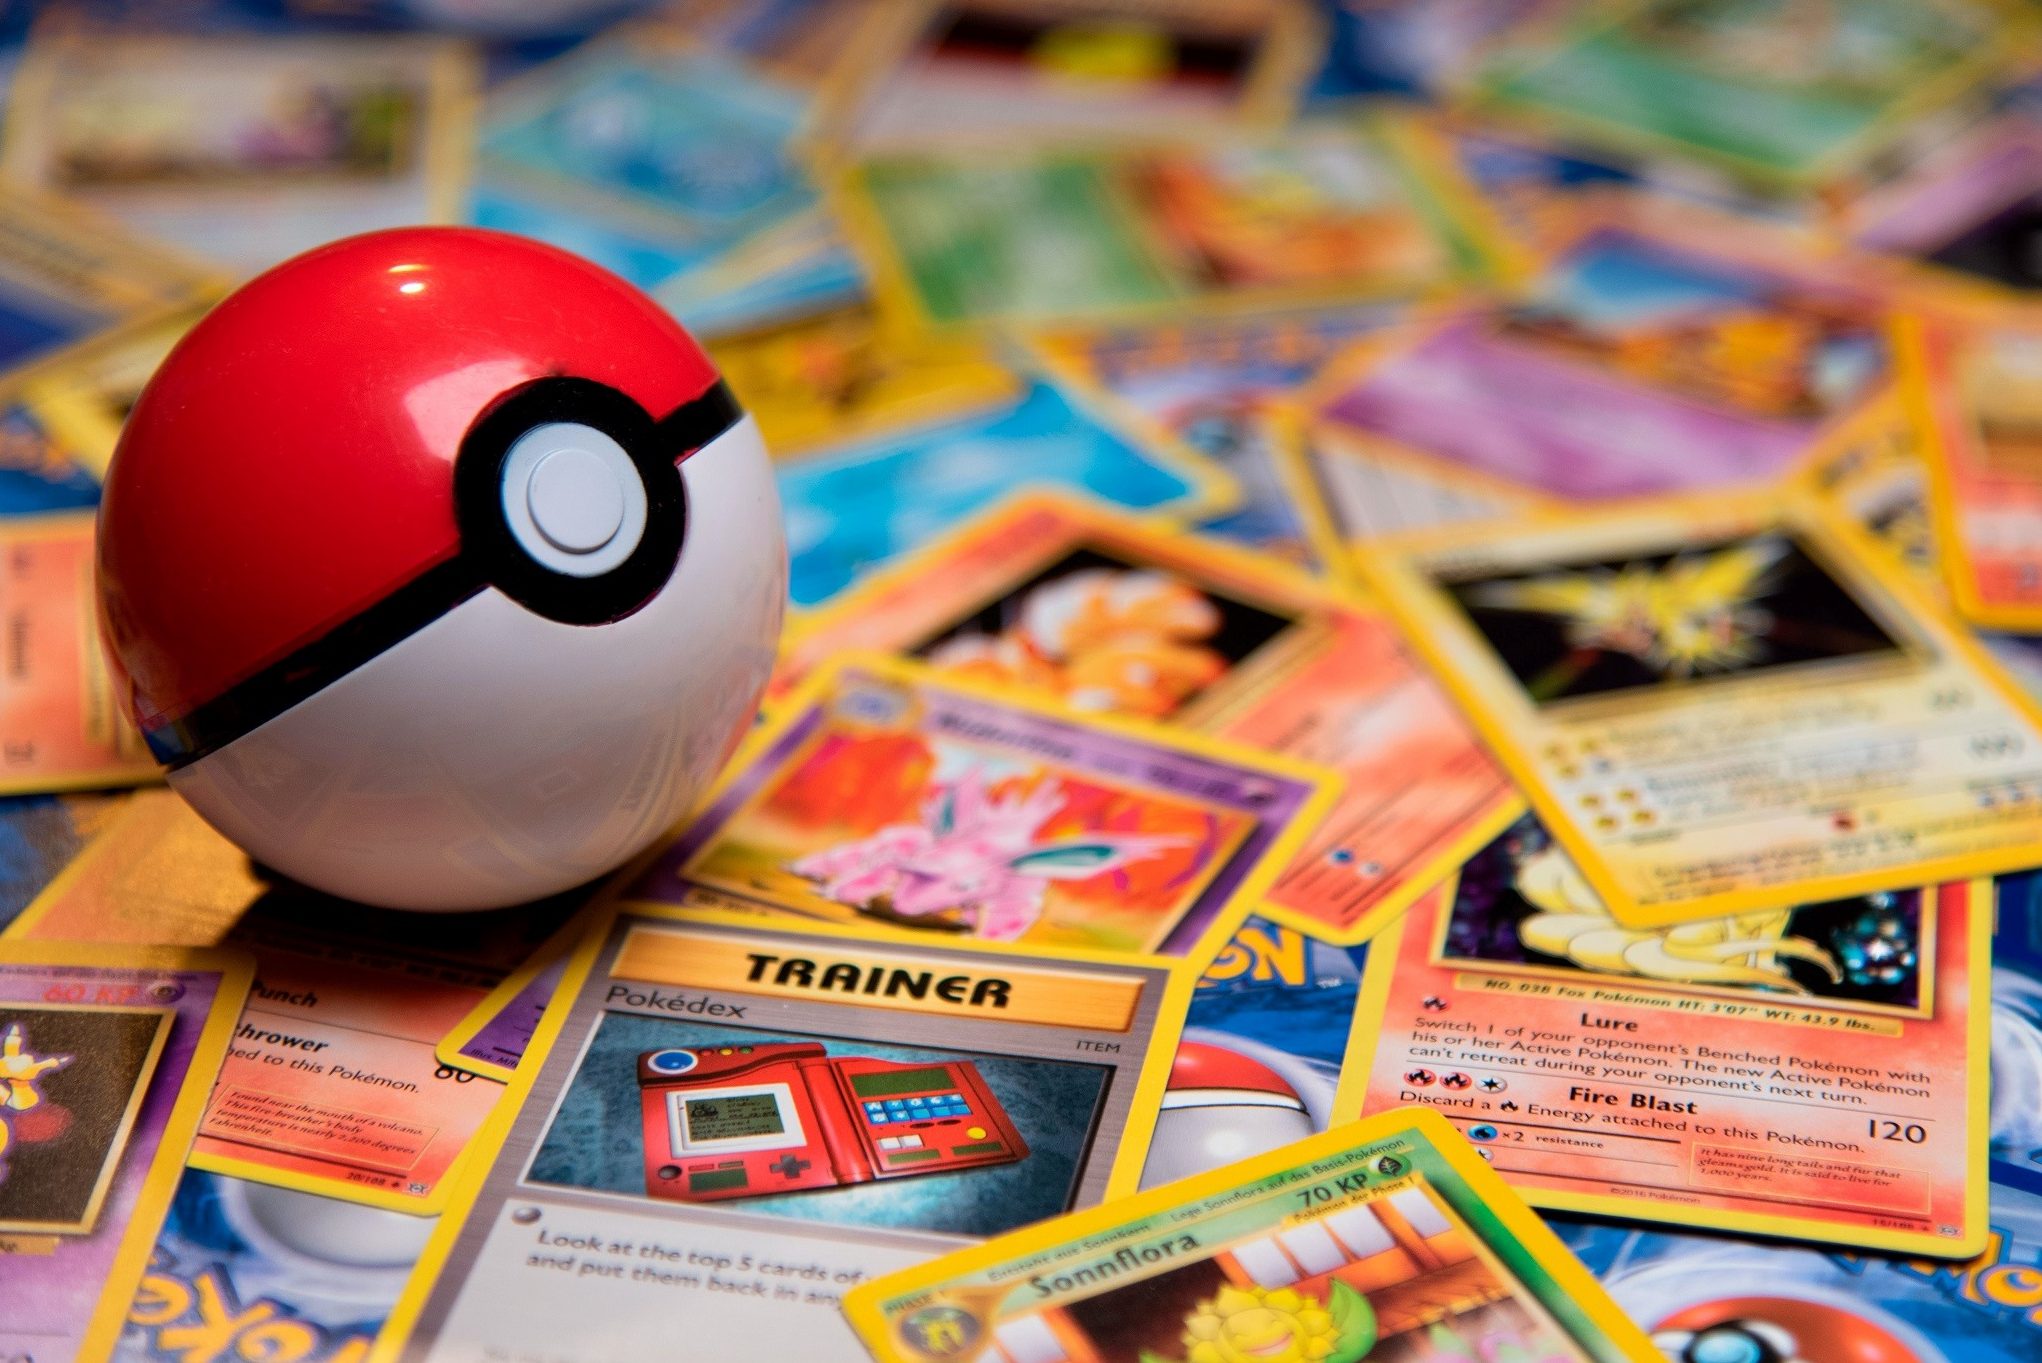 Pokeball on pile of Pokemon Trading Cards in room.